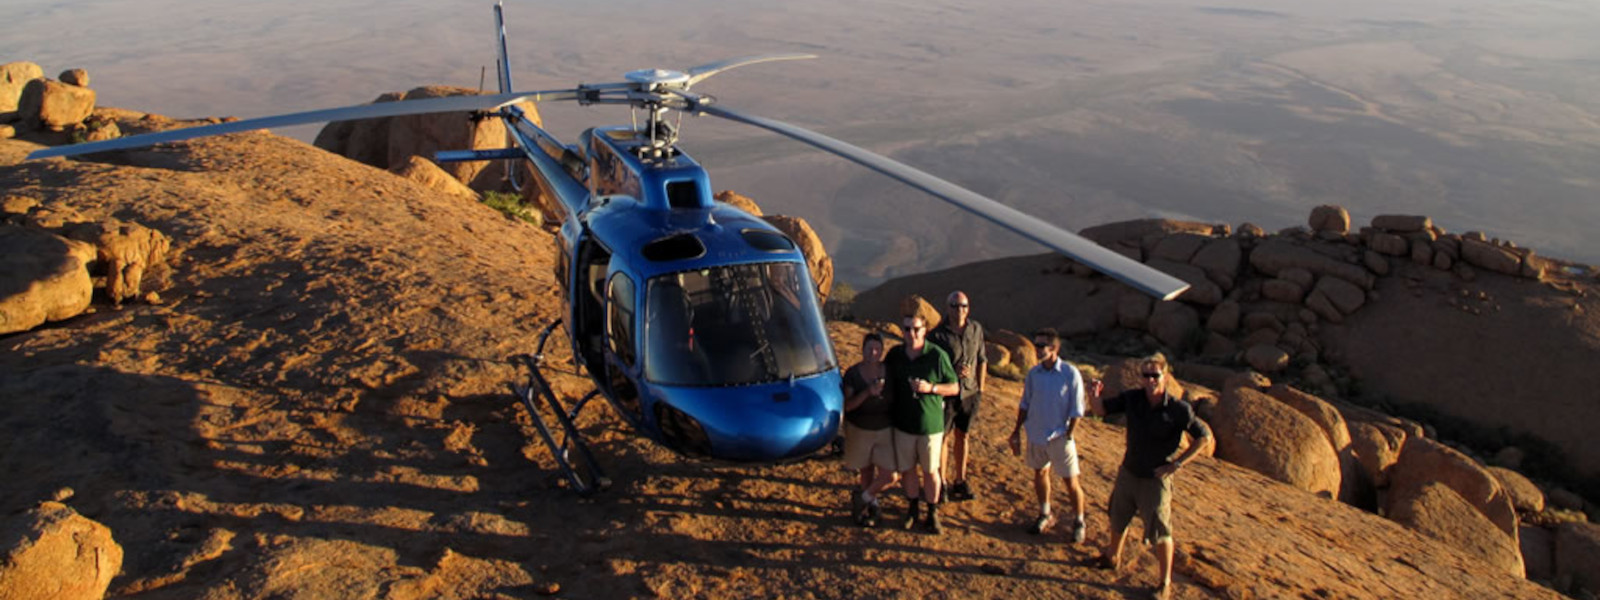 The Great Rift Valley Helicopter Safari